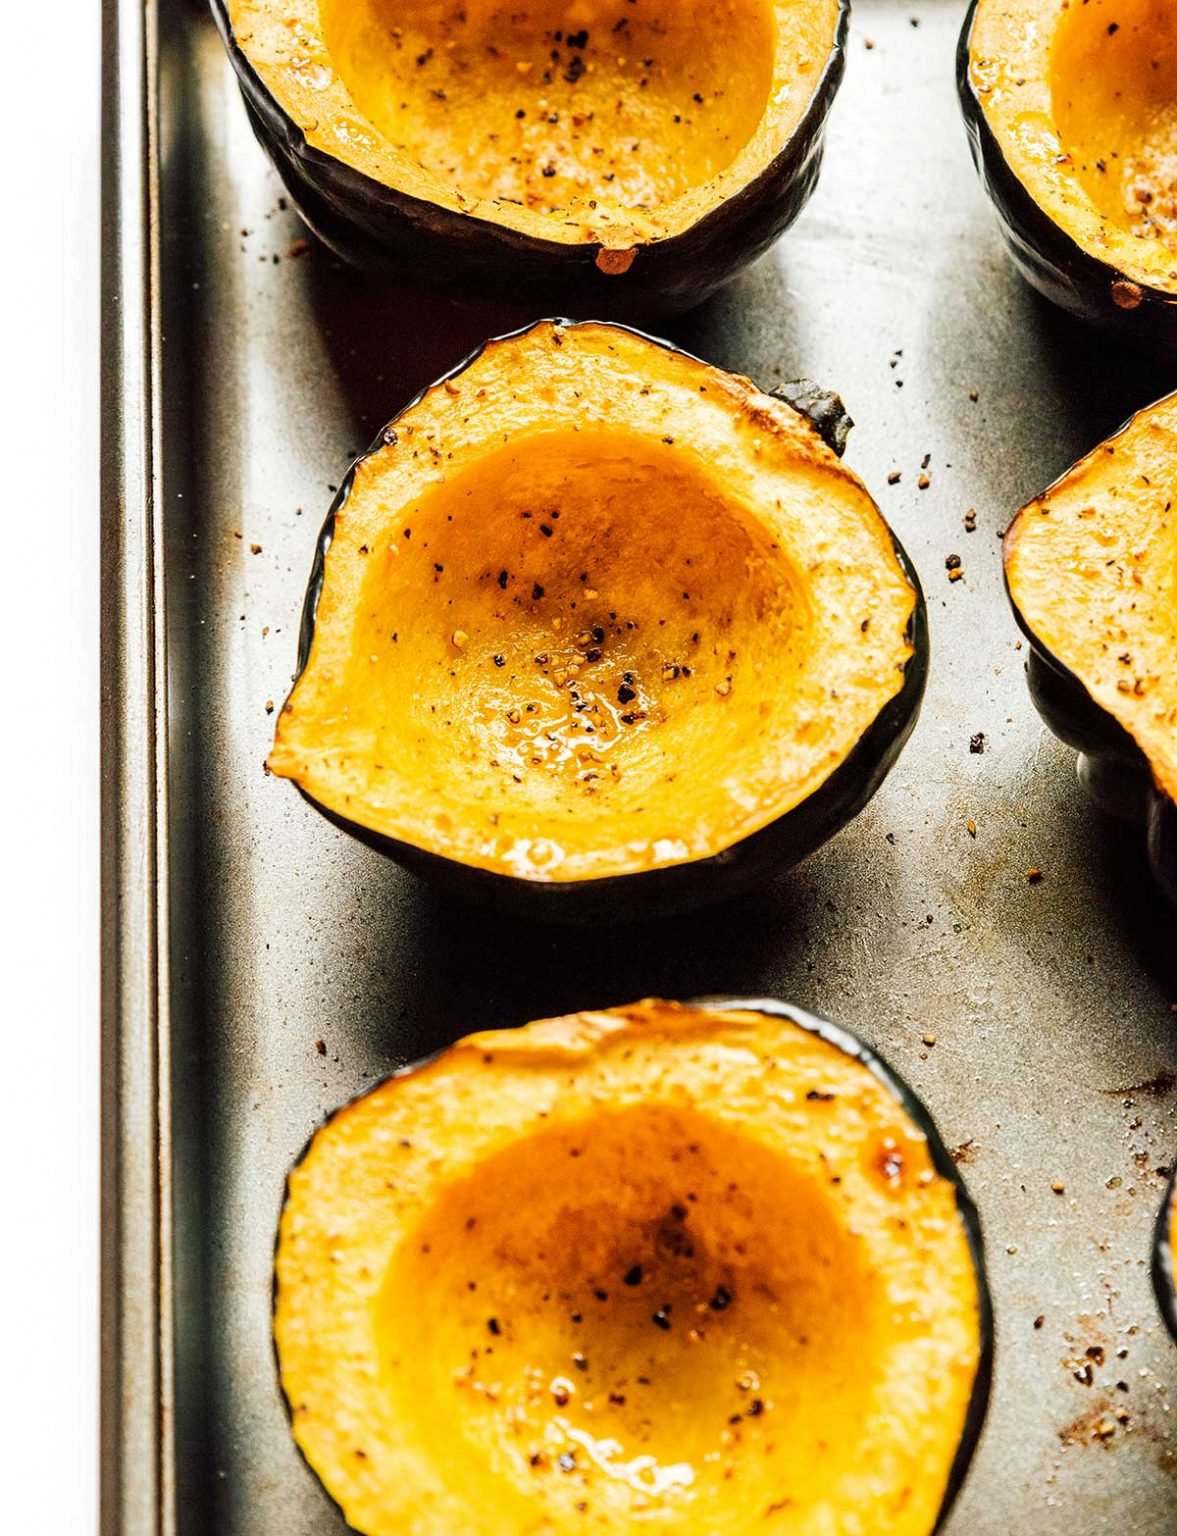 Acorn Squash 101 (+ How to Cook It 4 Ways!) | Live Eat Learn